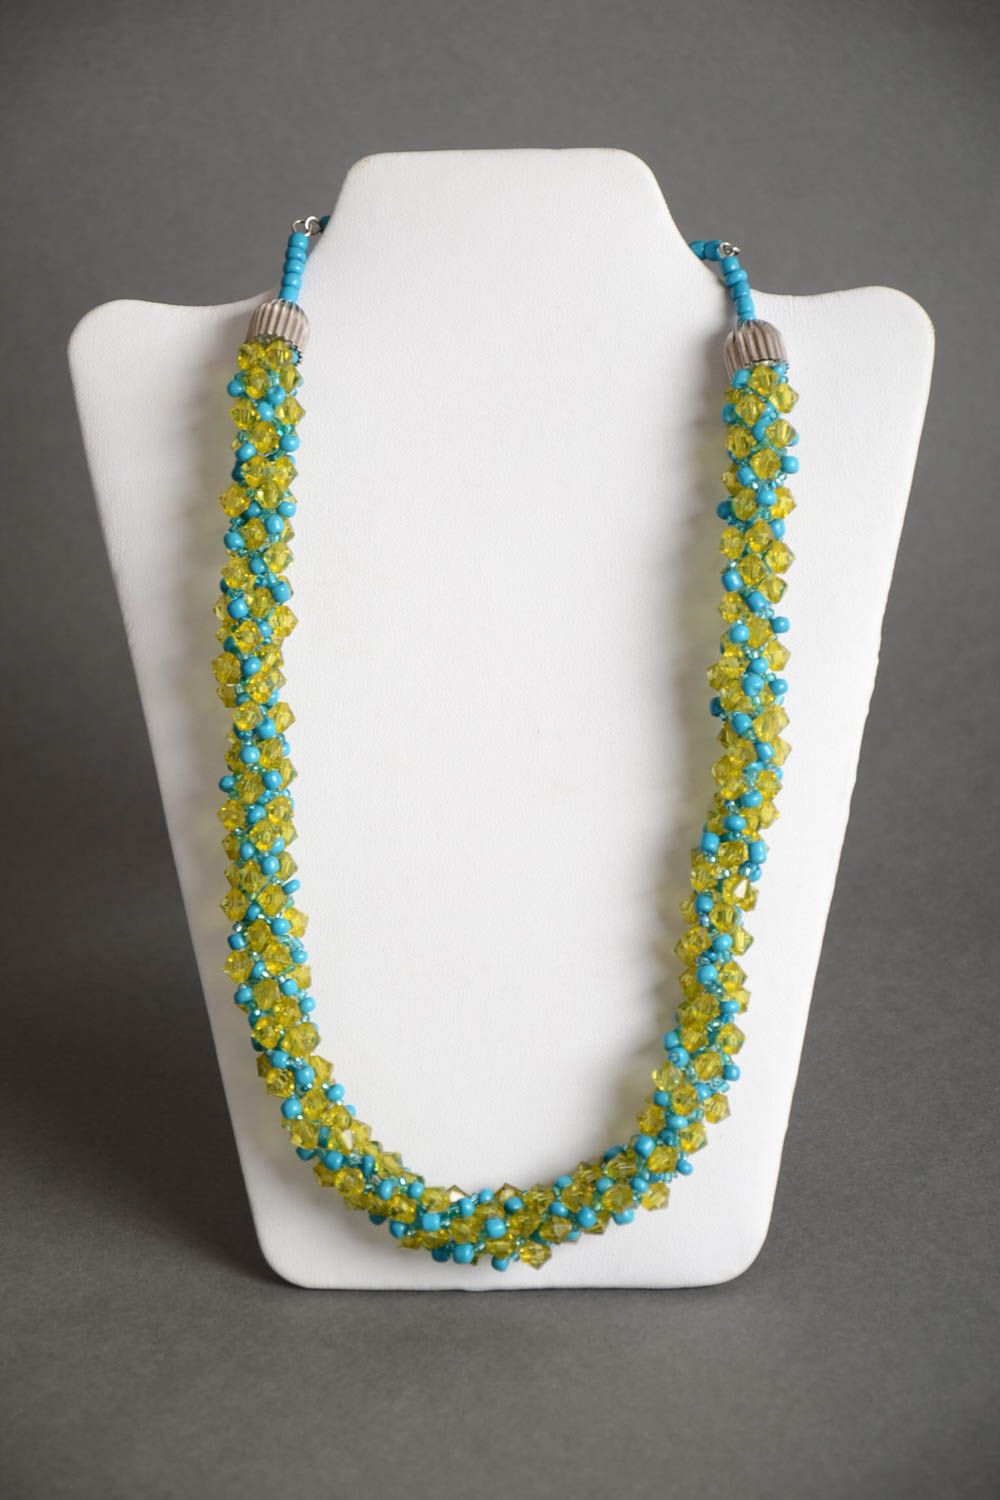 Handmade thin necklace crocheted of Czech beads in blue and yellow colors photo 2